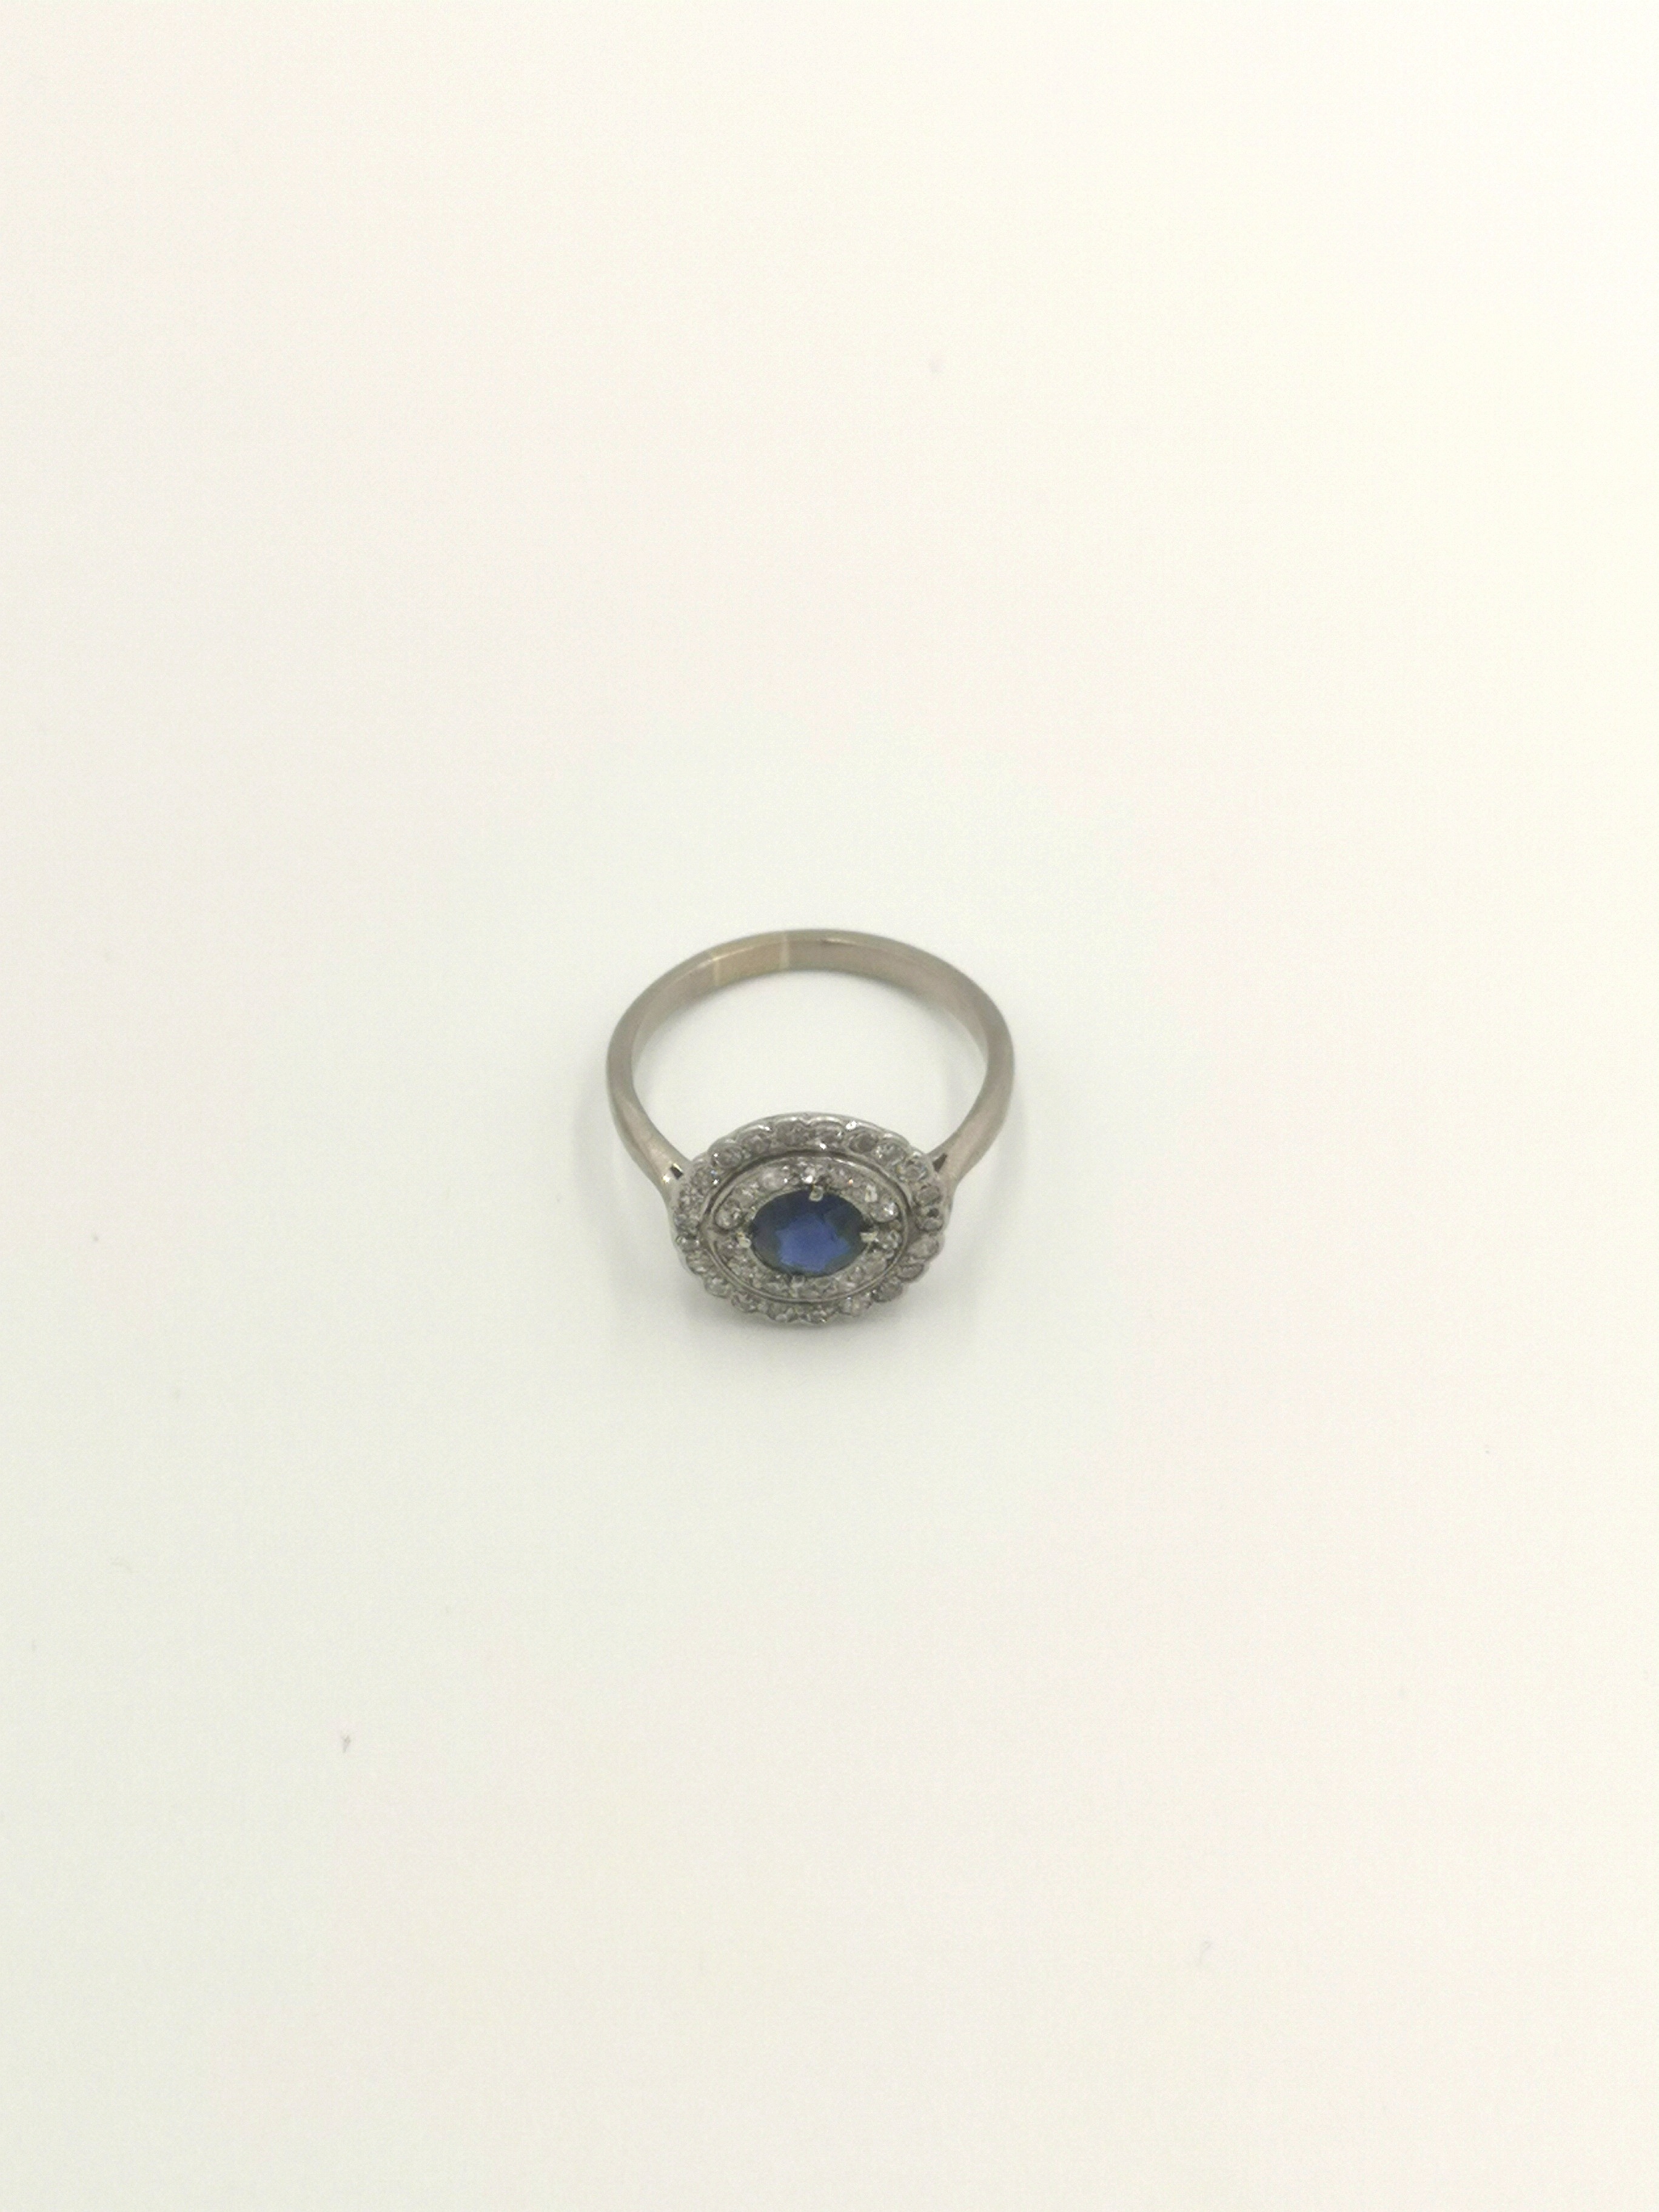 18ct white gold and sapphire cluster ring - Image 2 of 5